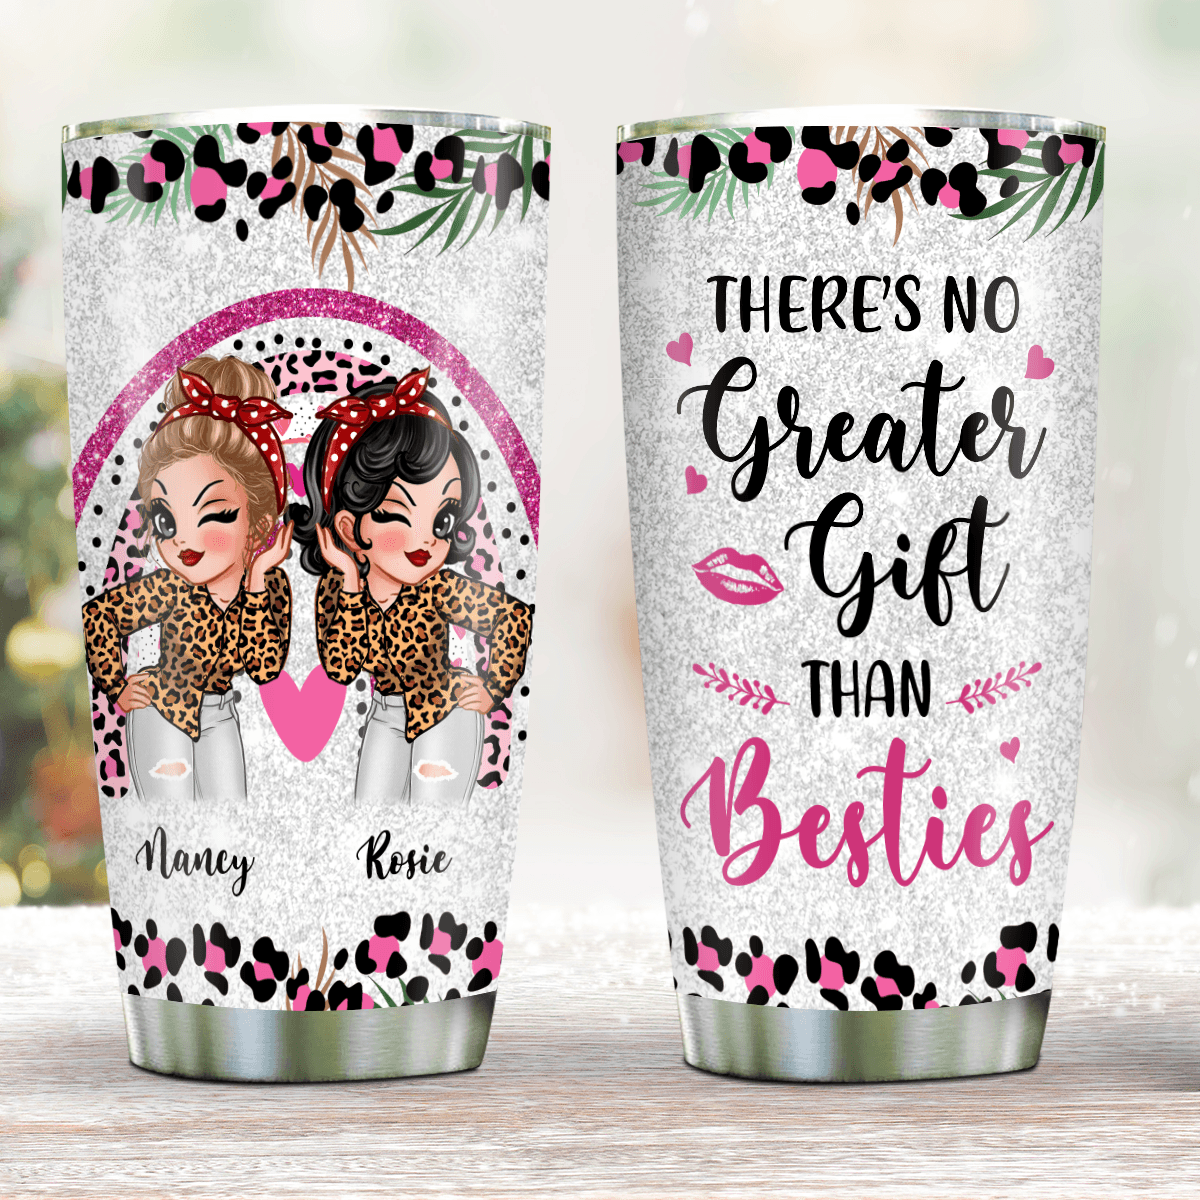 Bestie Not Sister By Blood But Sister By Heart Tumbler Personalized,  Christmas Gifts For Best Friend Woman, Bestie Photo Tumblers Cup - Best